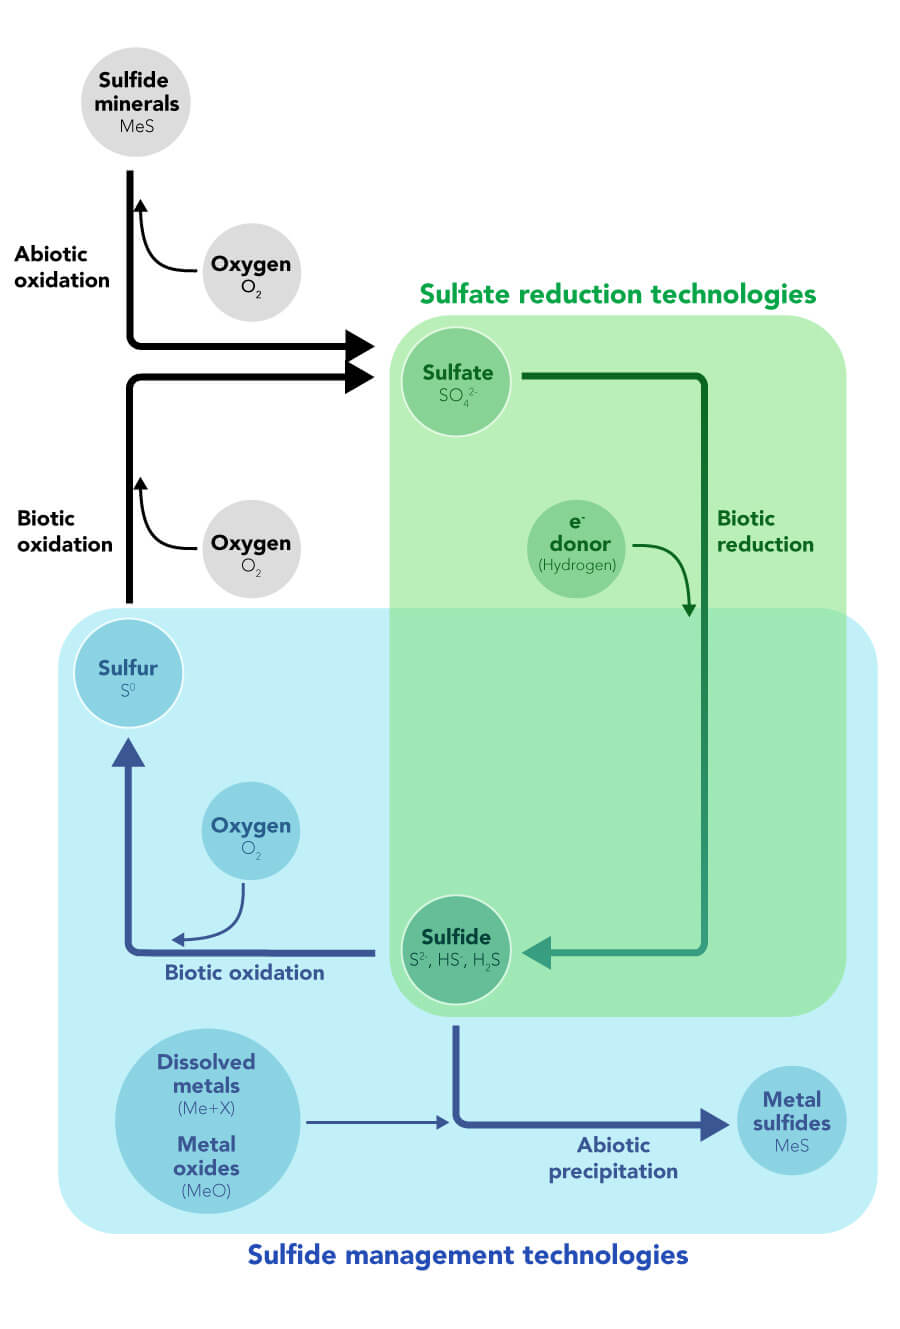 Figure shows the sulfur cycle as relevant to biological sulfate treatment in water. 